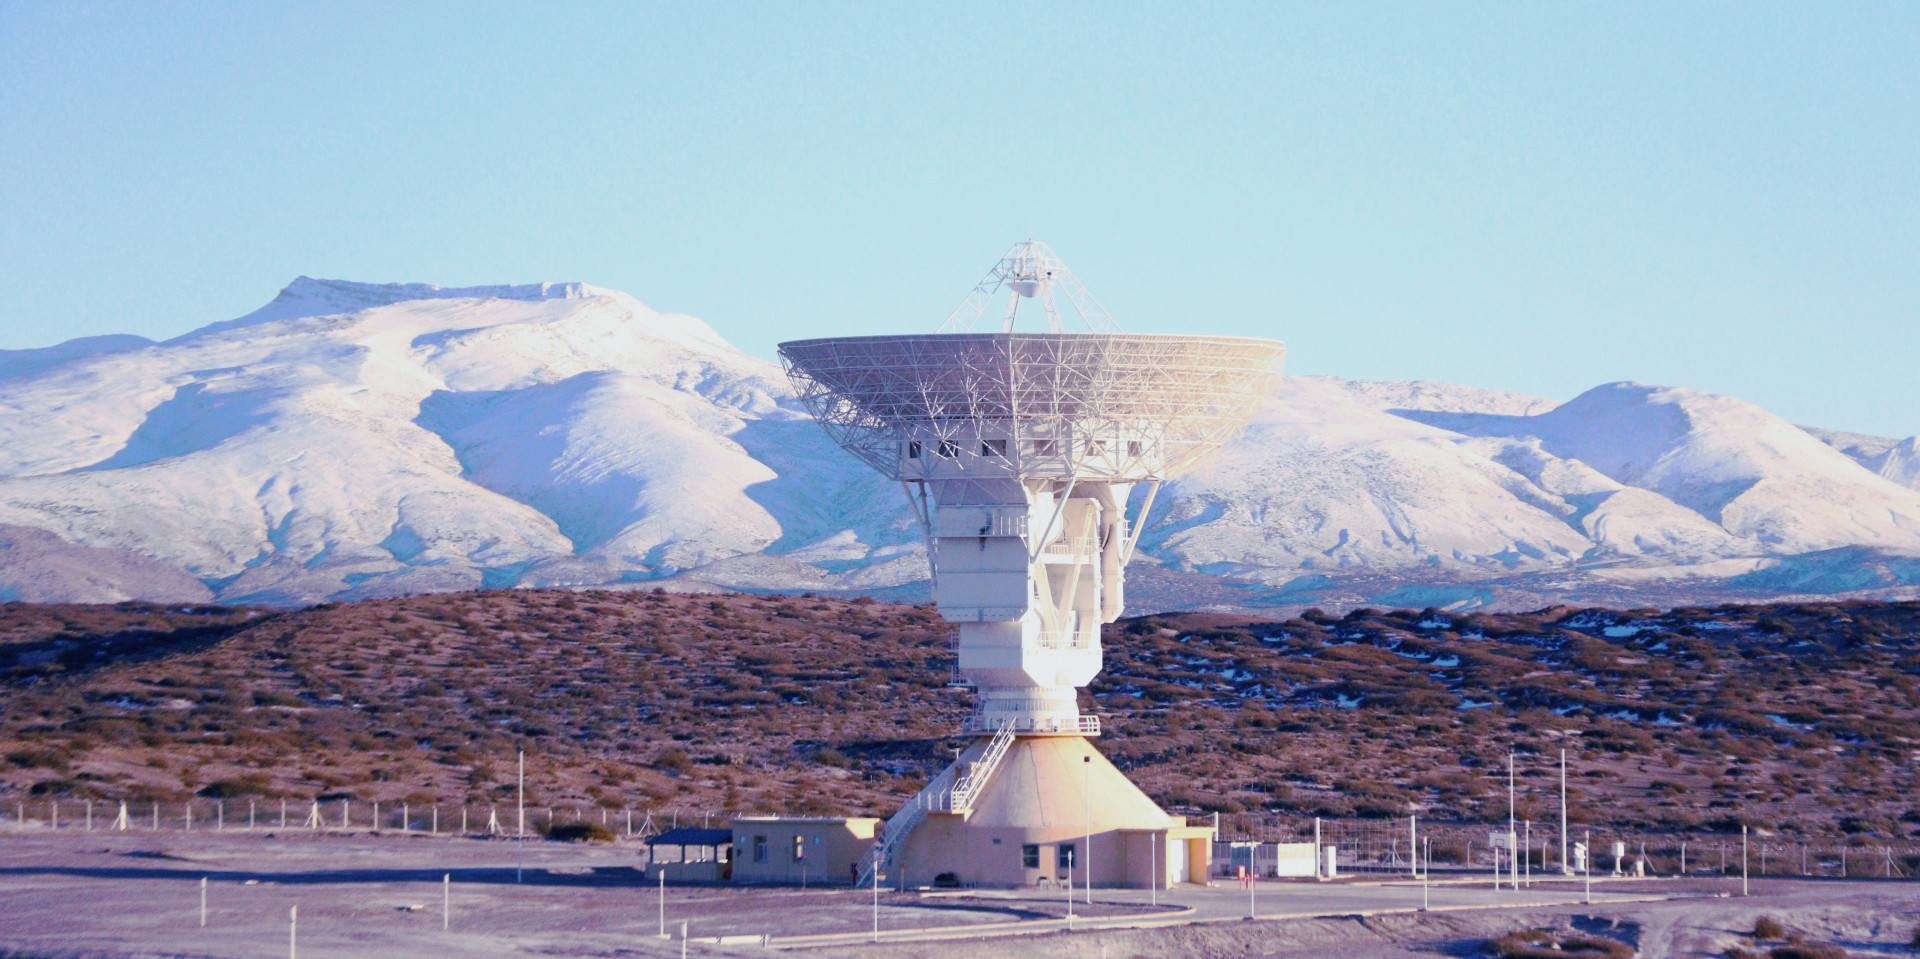 China is building a satellite communication station in Antarctica